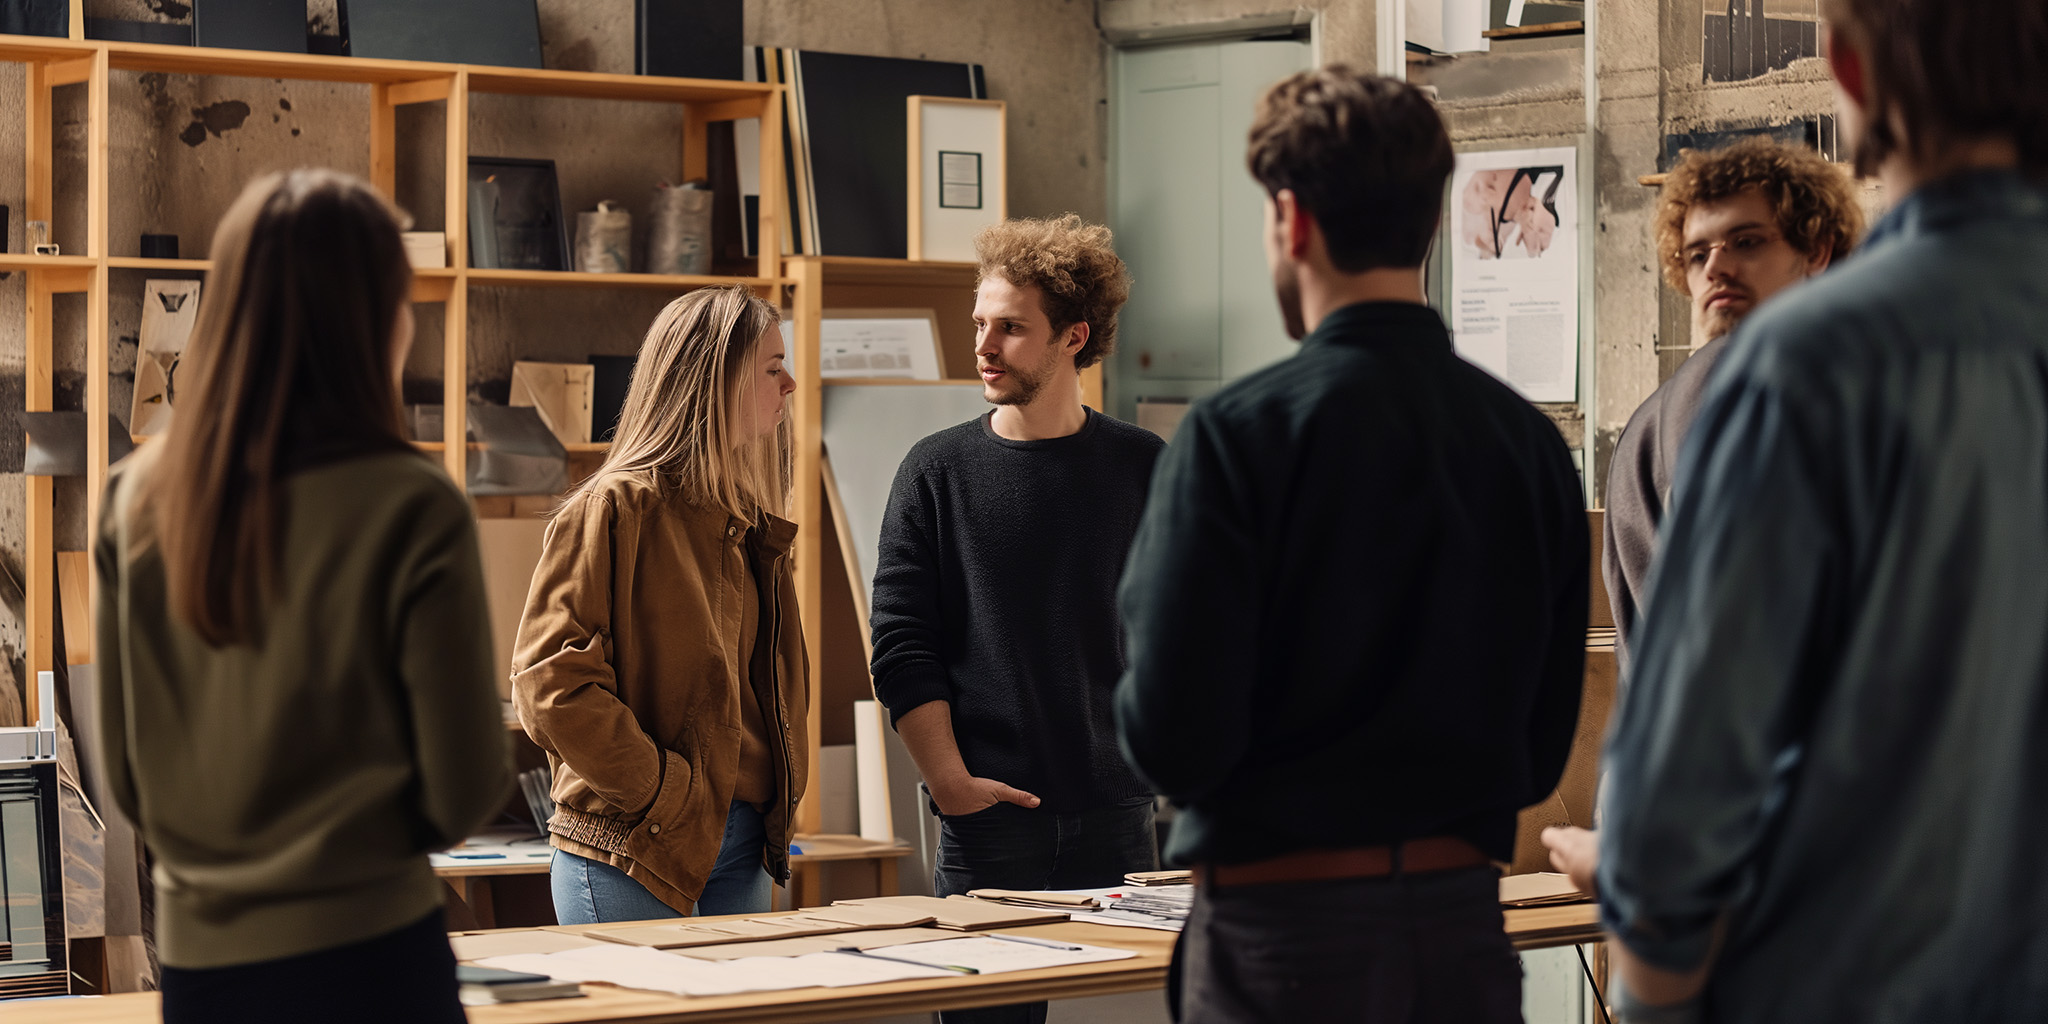 A focused group discussion among young adults in a studio, with design drafts and materials in the background, conveying a sense of teamwork and creativity.